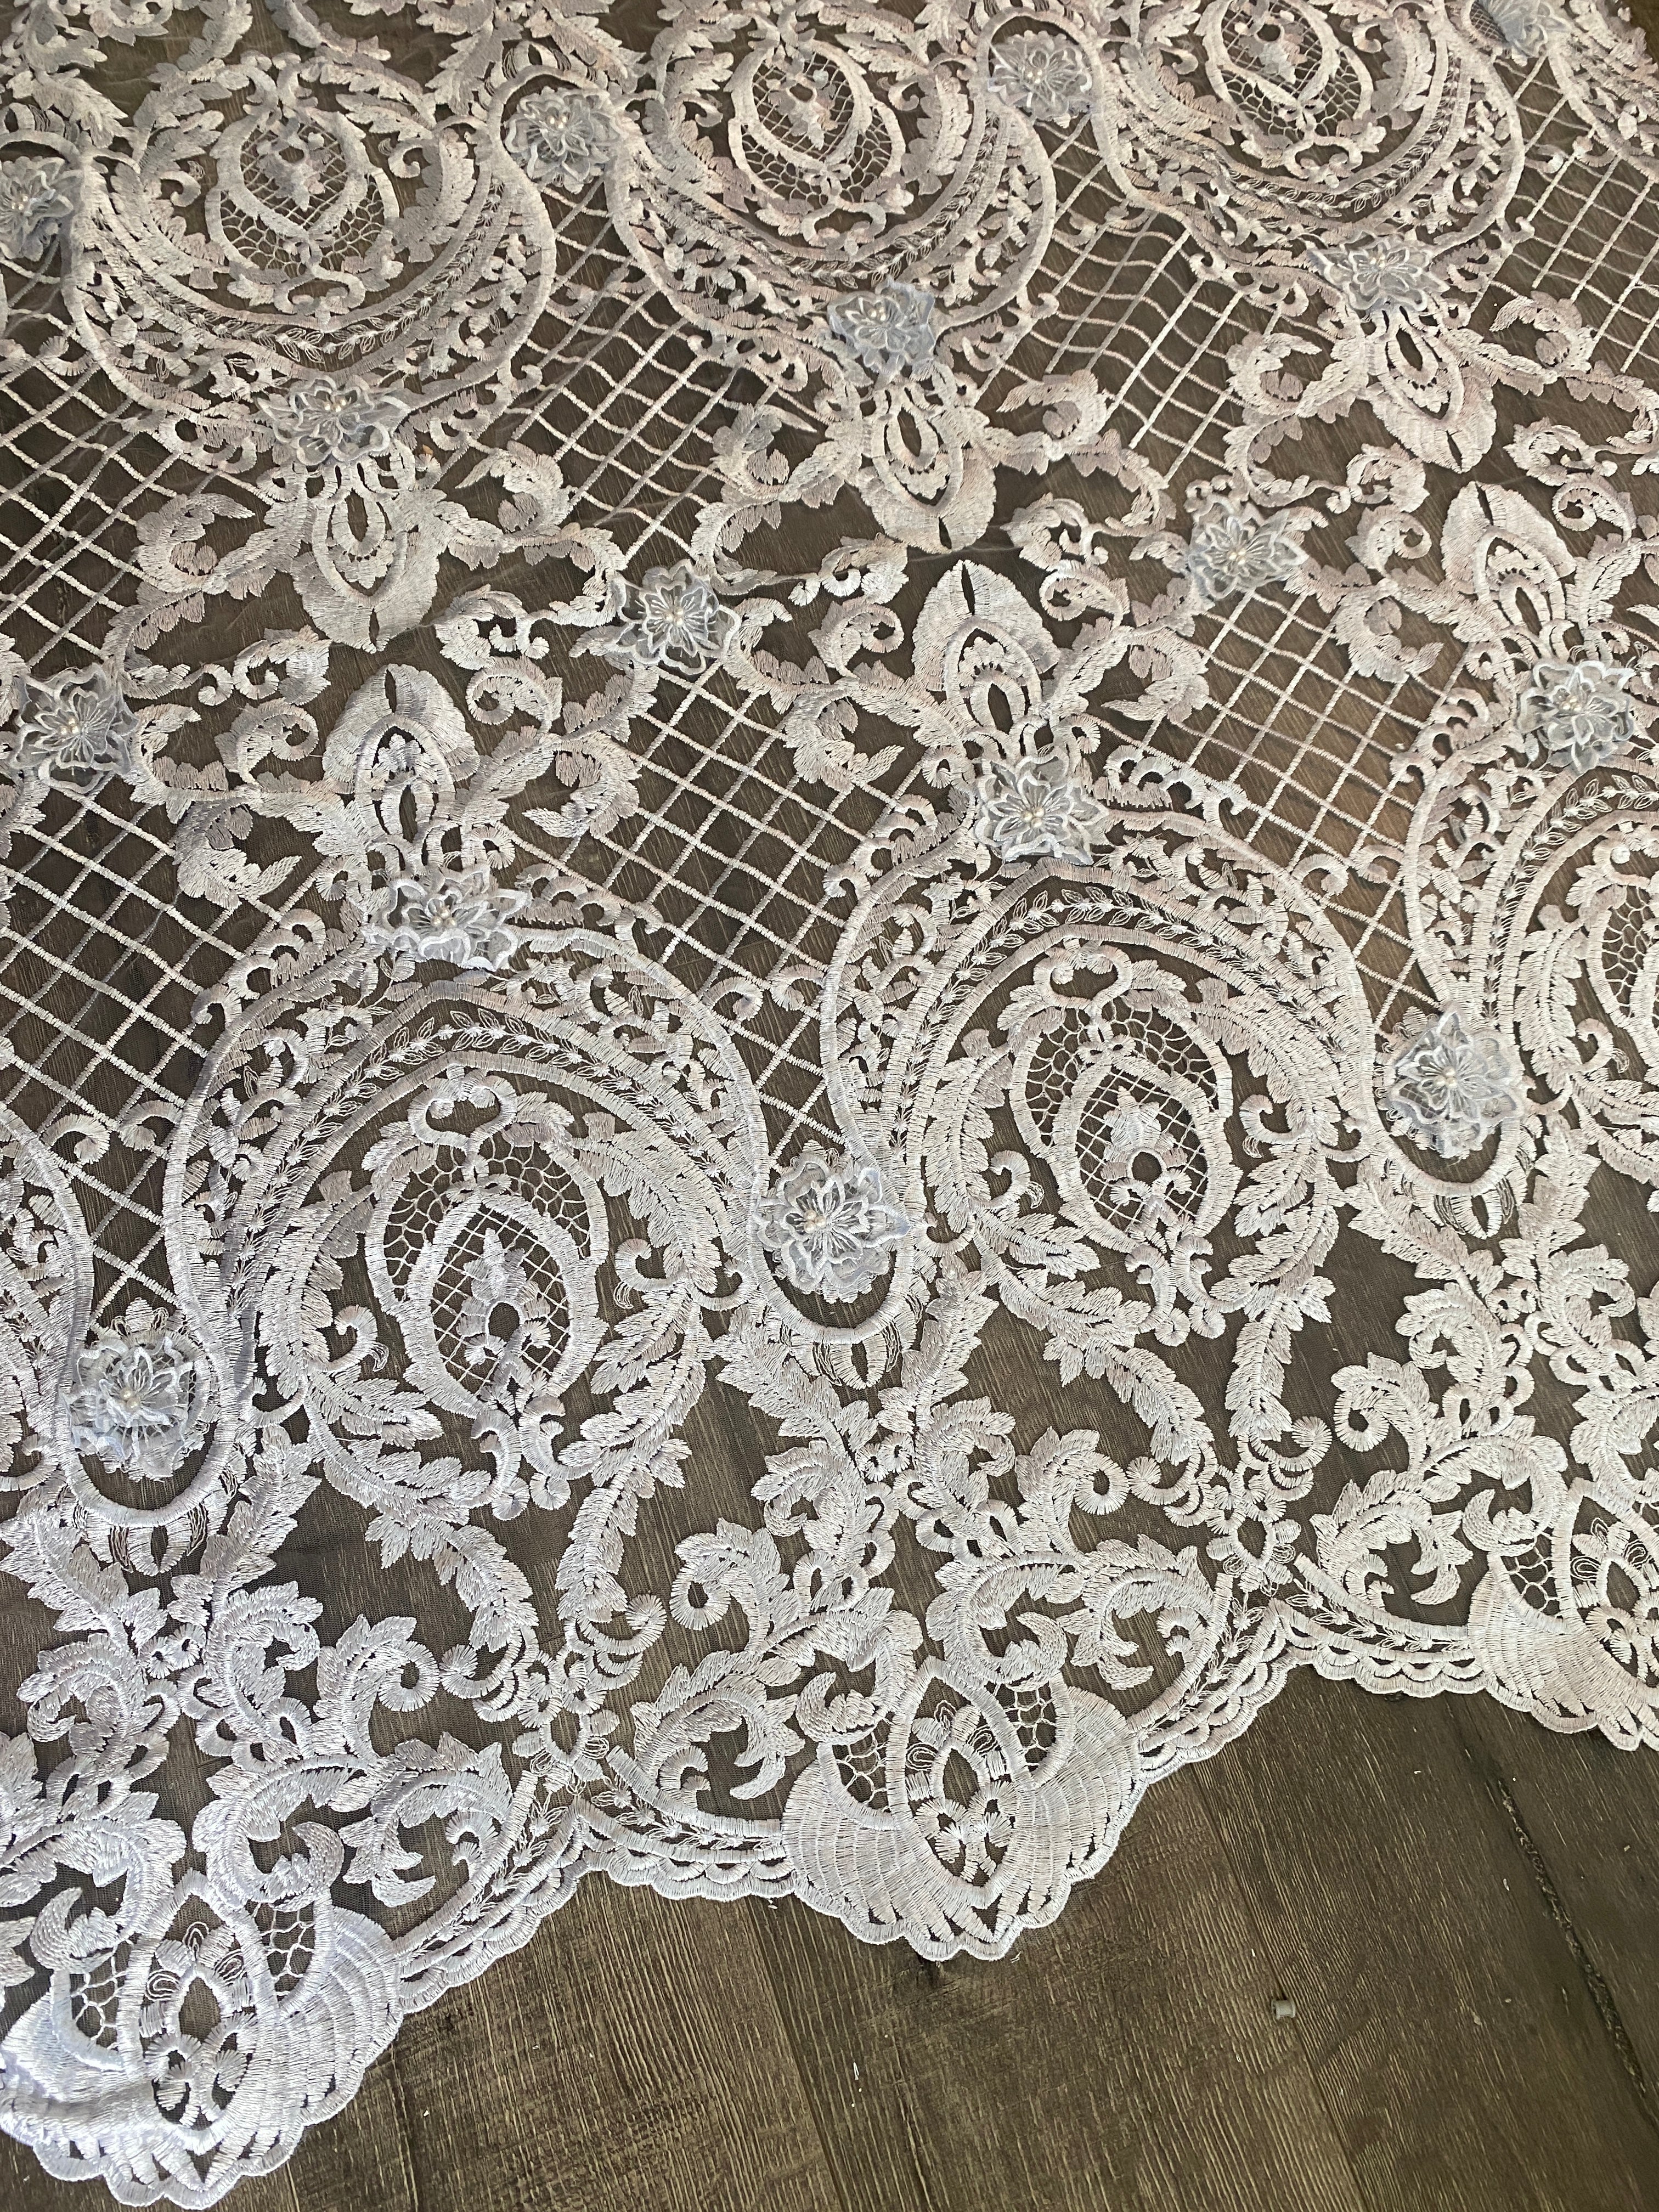  Light Silver Guipure Lace, silver lace for woman, bridal lace in silver, lace for home decor, lace for curtains, lace for skirts, lace in low price, discounted lace, best quality lace, durable lace, cheap lace, sale on lace